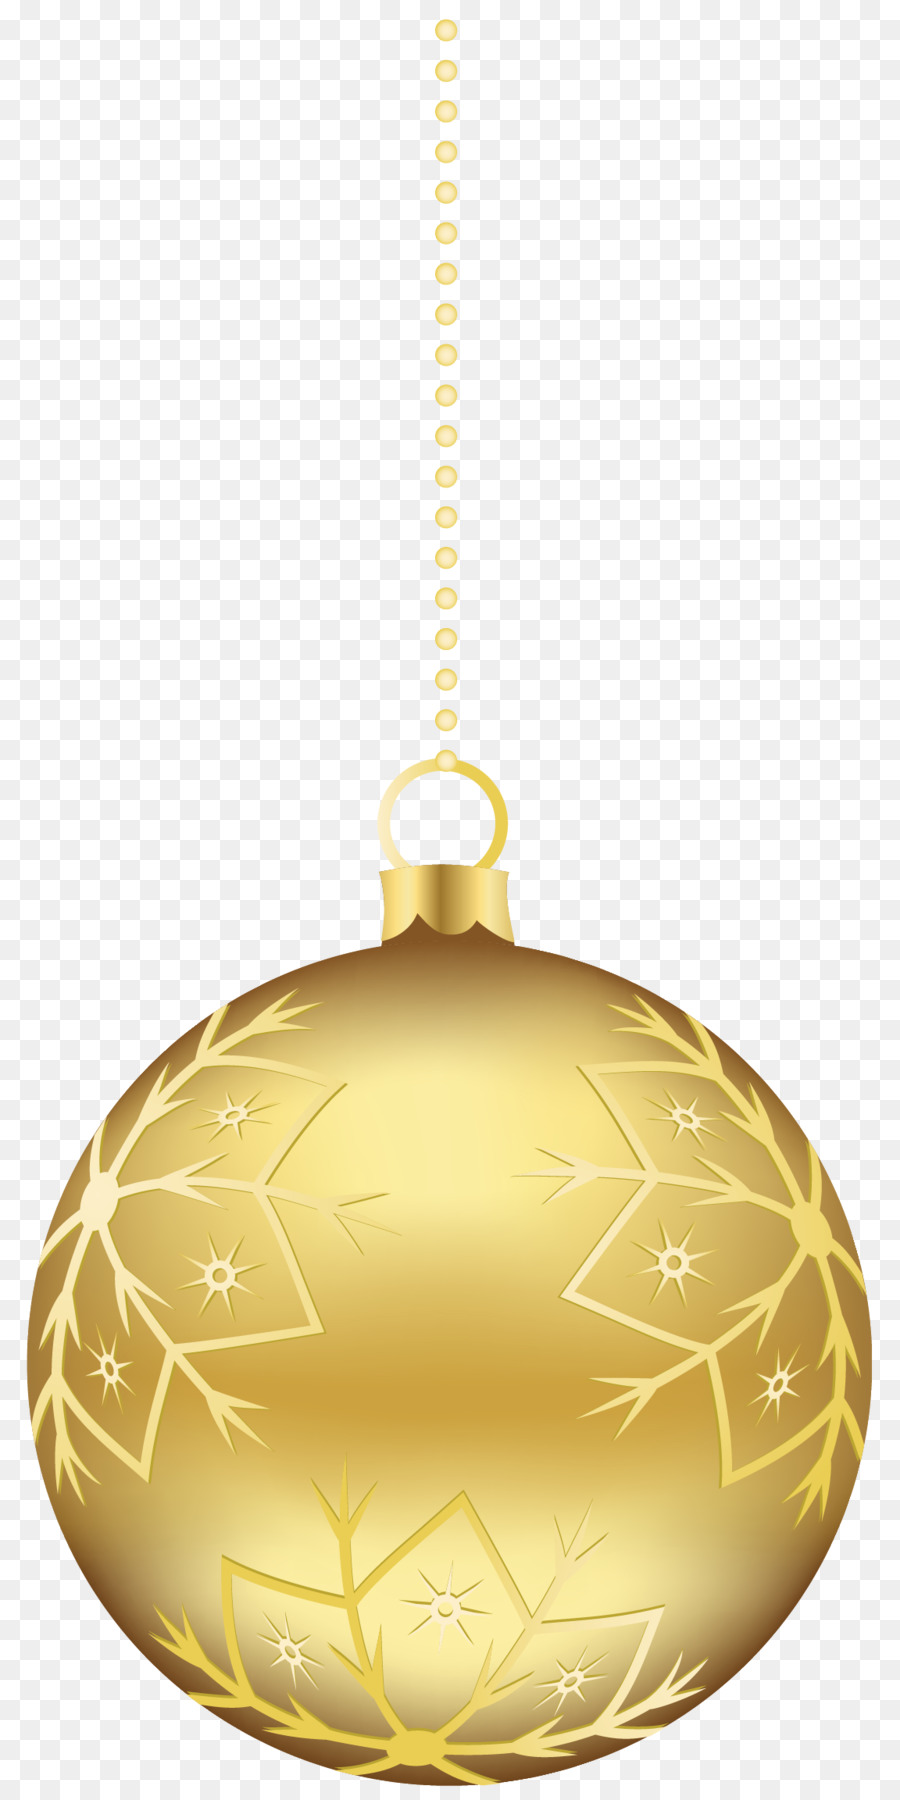 Christmas ornament Christmas decoration Gold Clip art - Images Of Gold Ornaments png download - 1152*2304 - Free Transparent Christmas Ornament png Download.